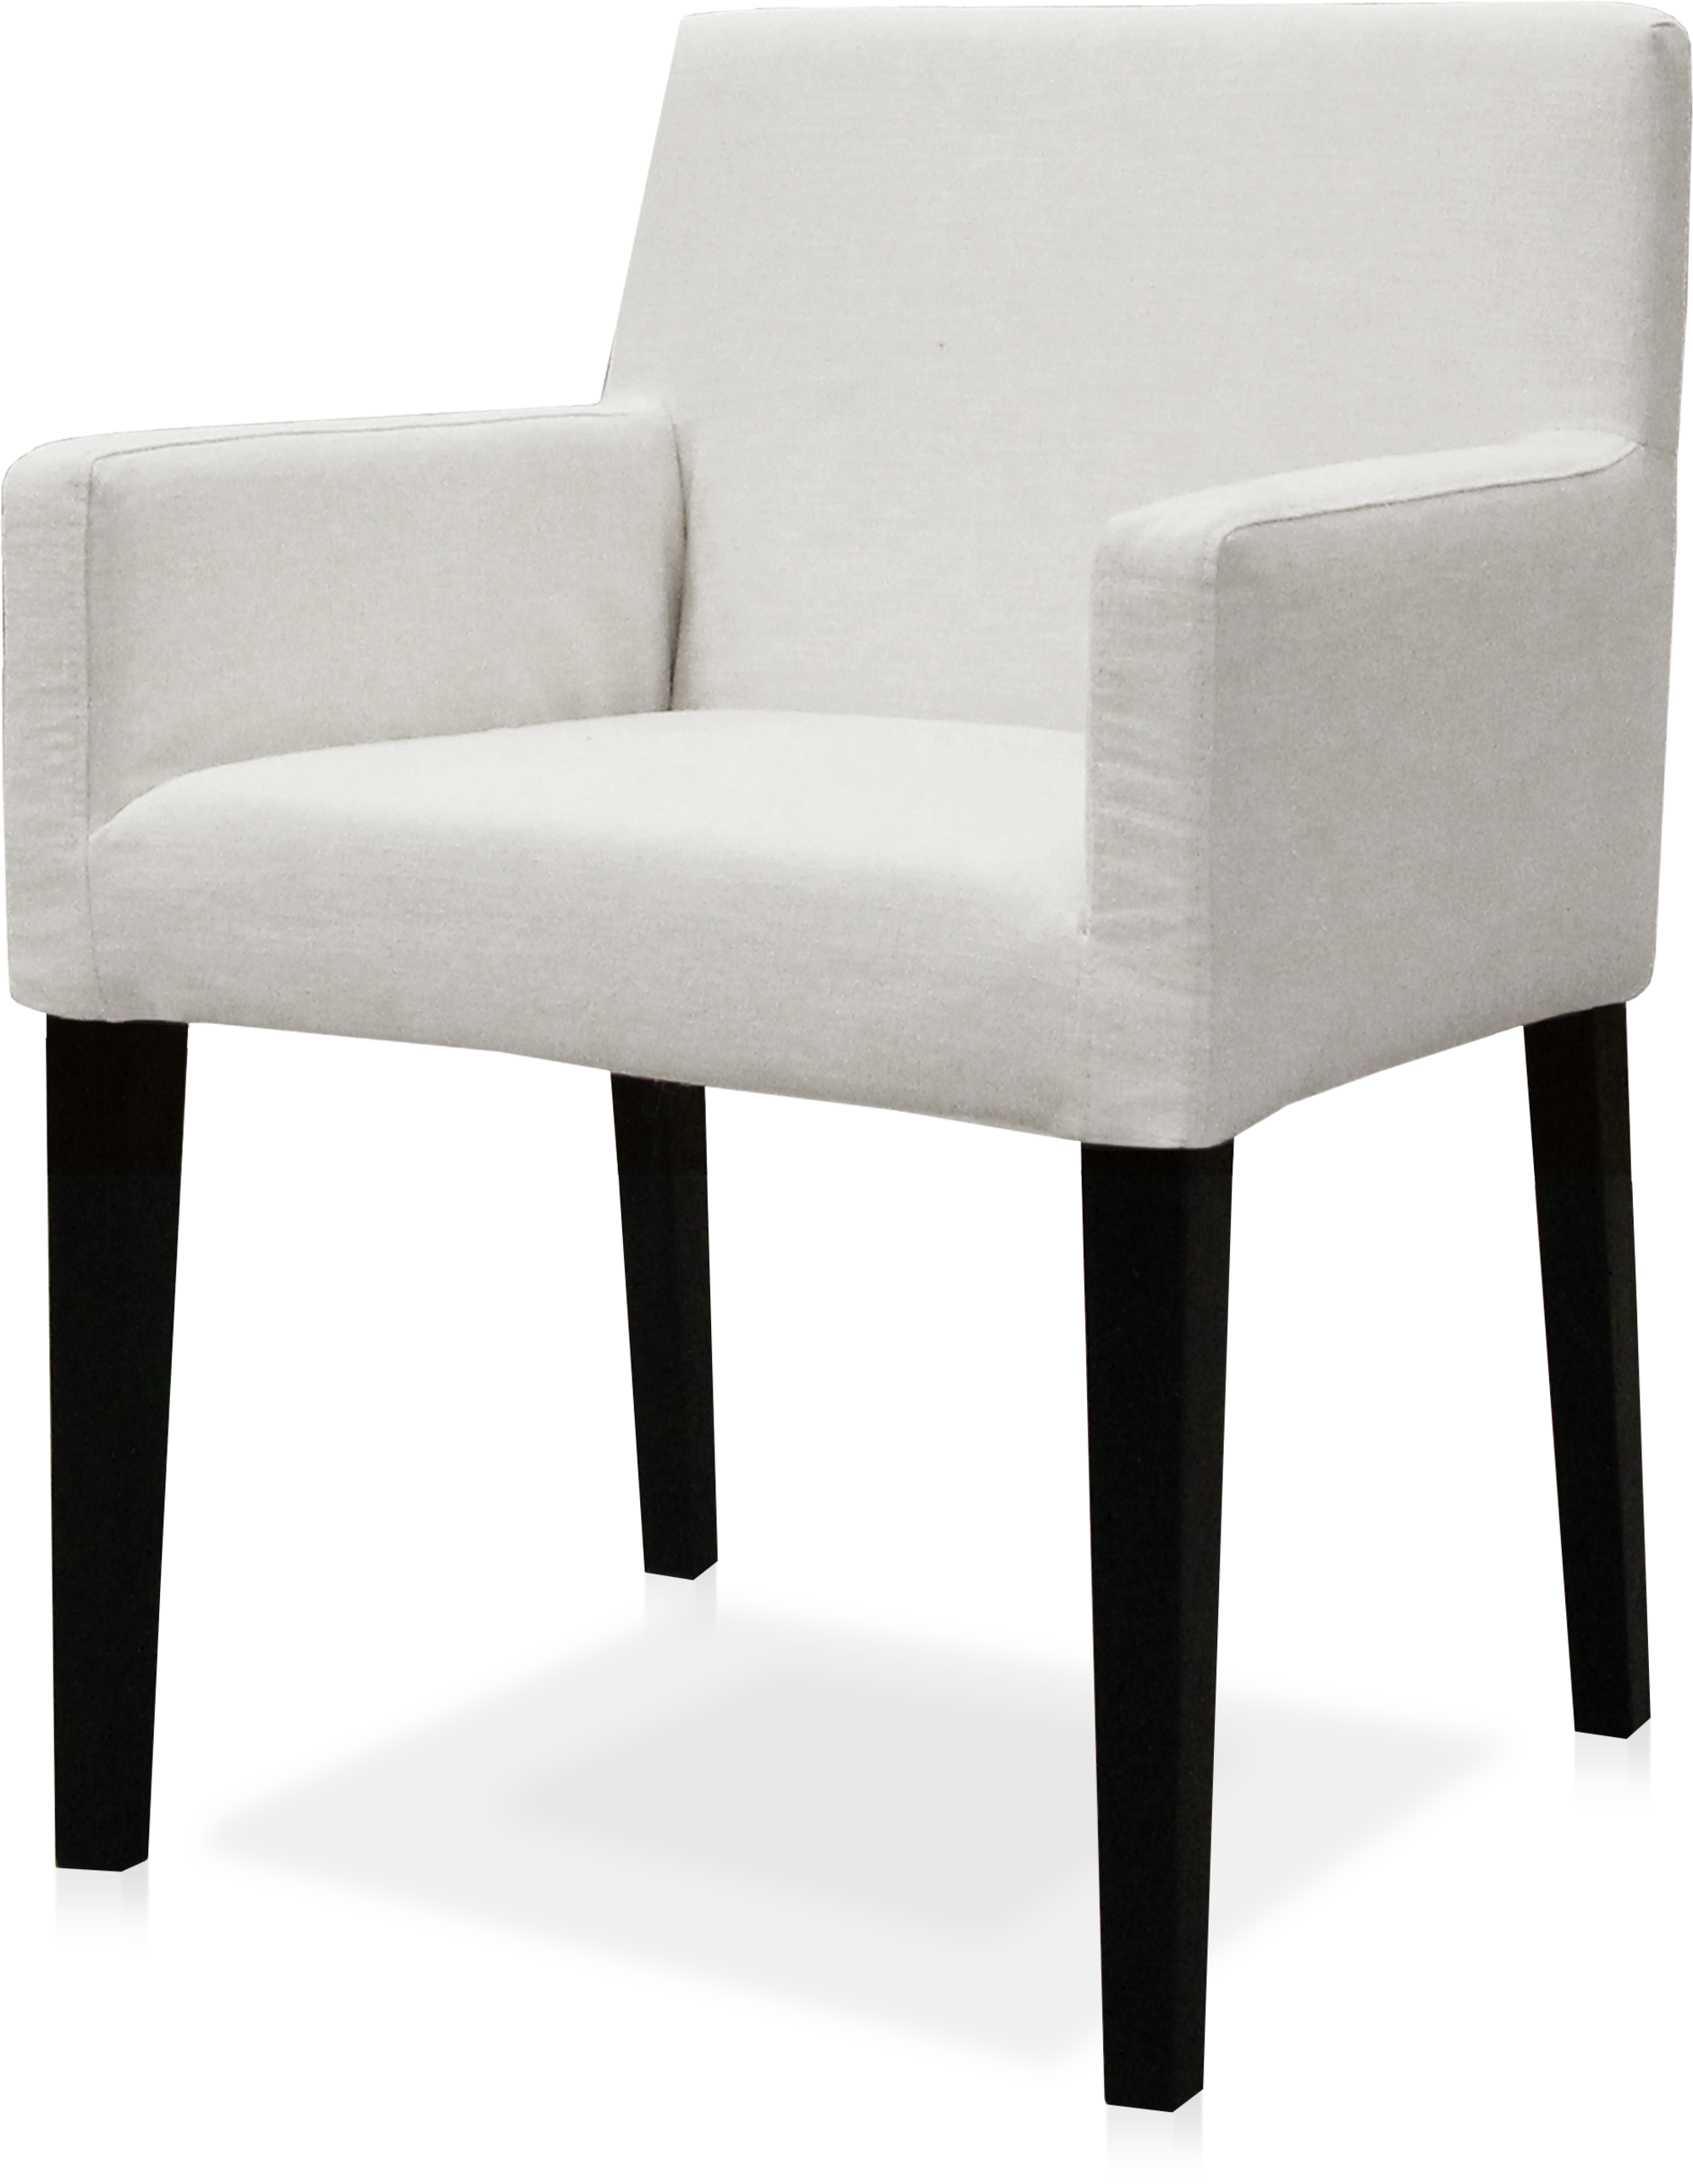 Lago dining chair